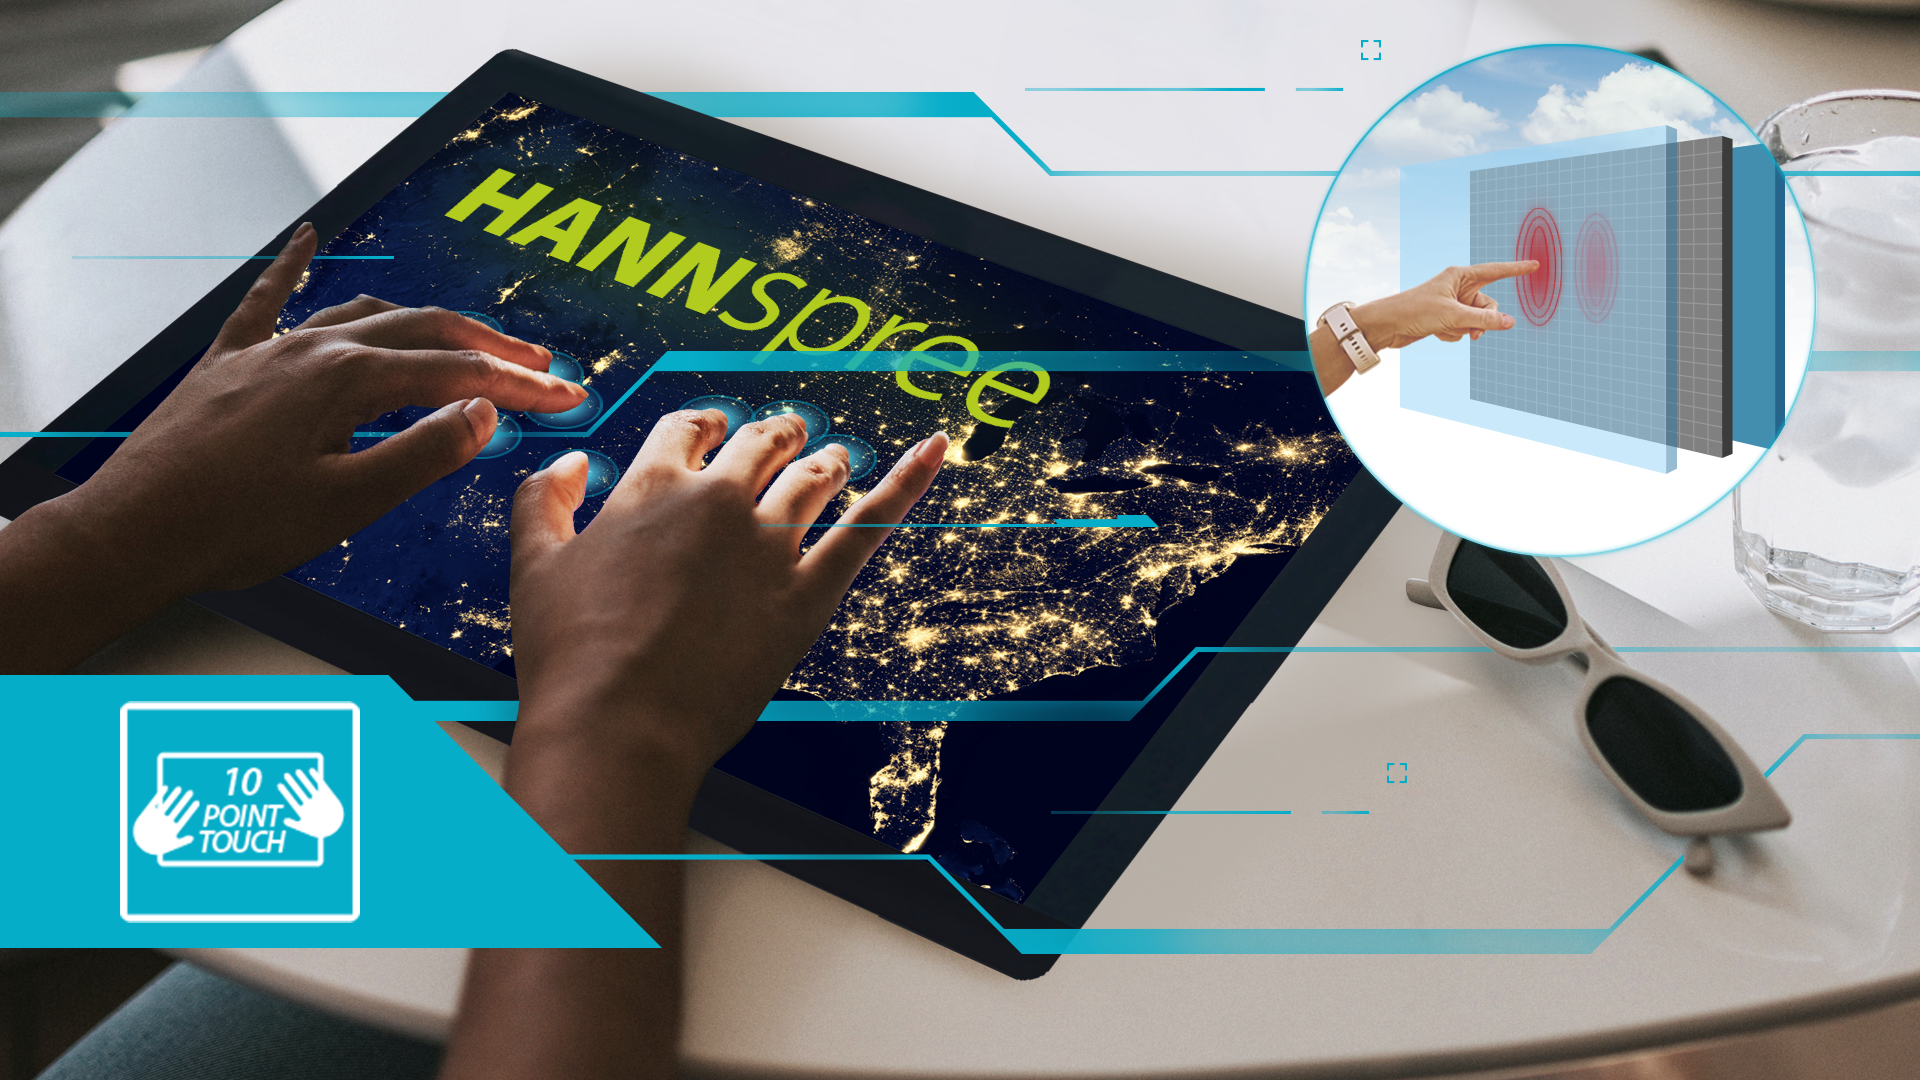 HANNSpree HO220PTA Monitor allows everyone to play and collaborate at the same time